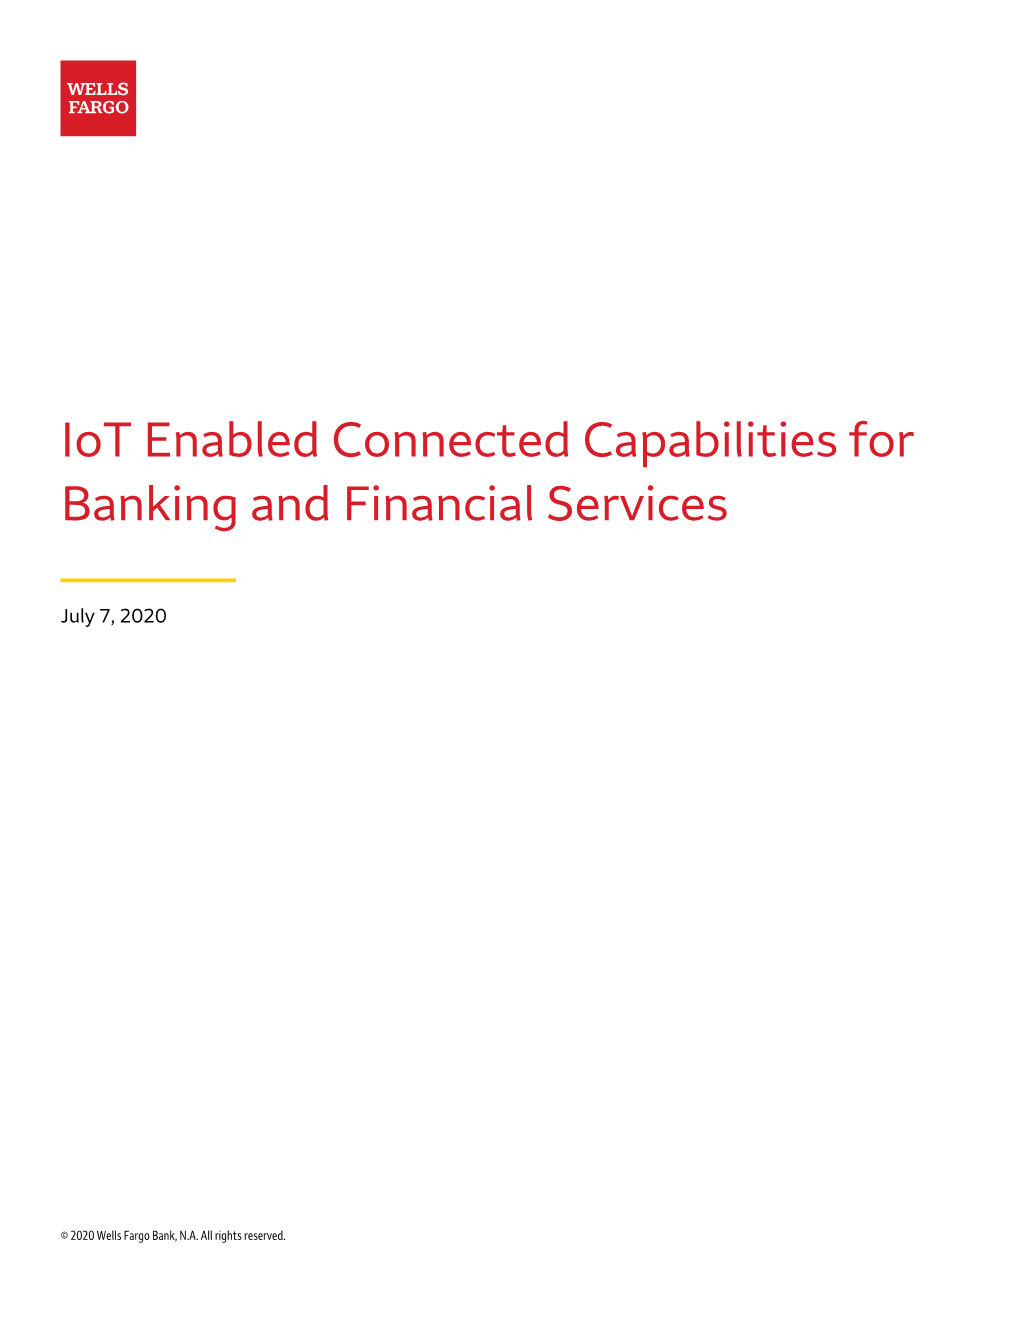 Iot Enabled Connected Capabilities for Banking and Financial Services